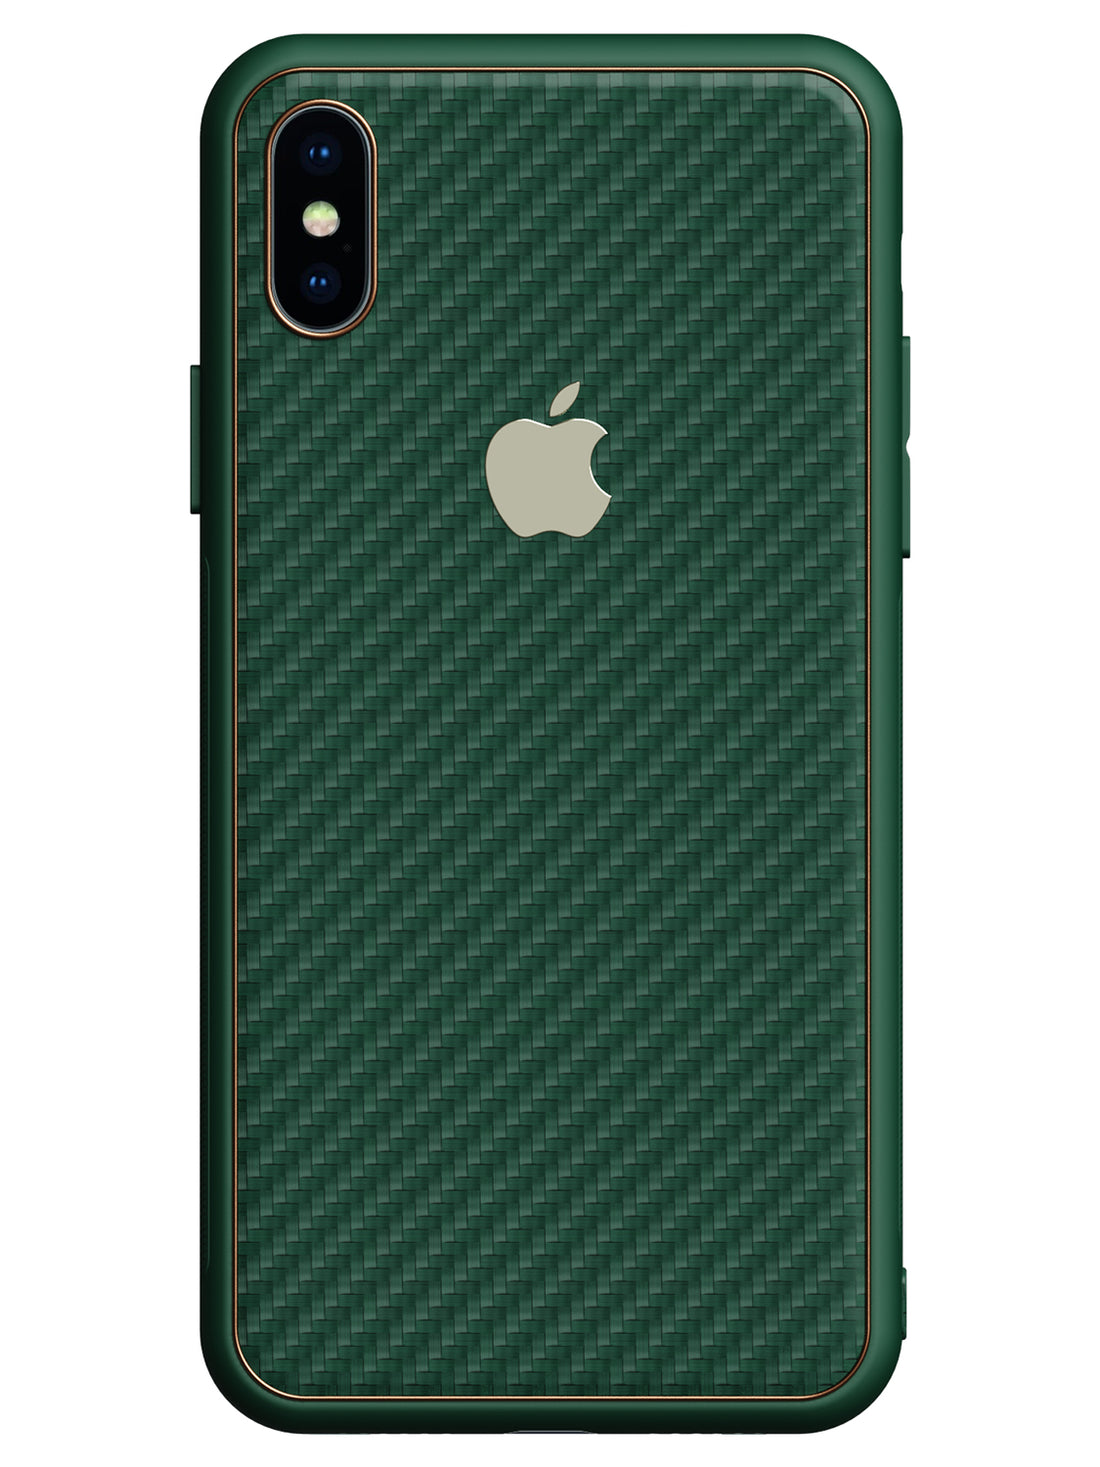 Carbon Leather Chrome Case - iPhone X/XS (Green)